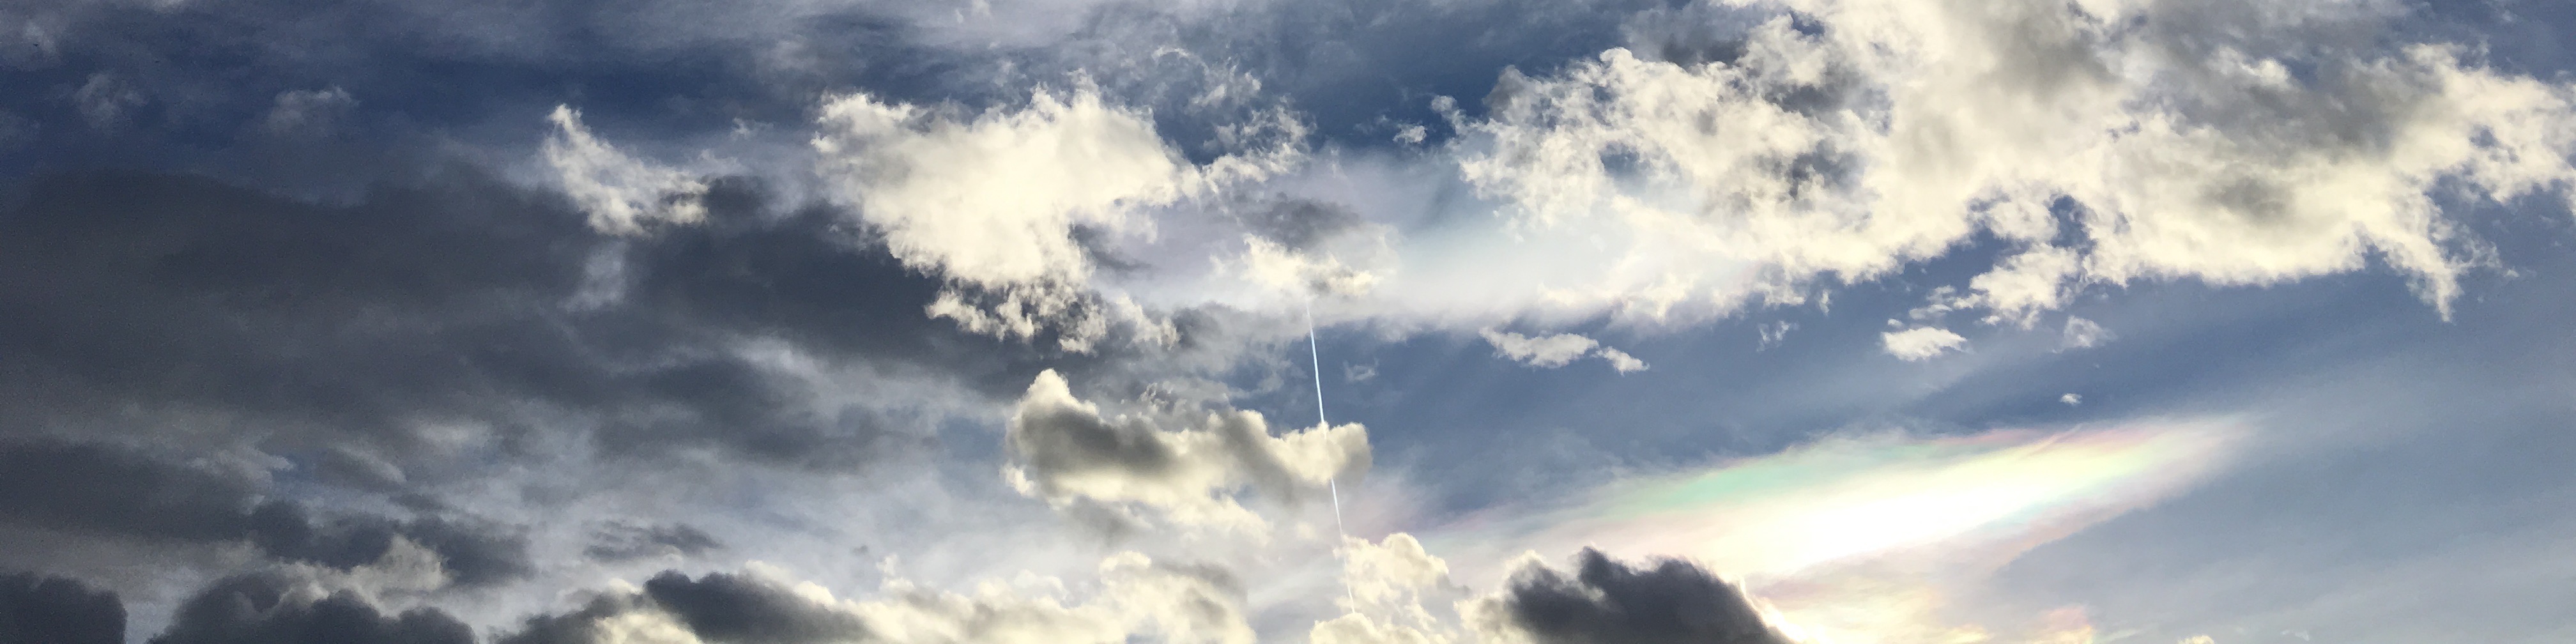 Header image. Sunset with clouds and airplane contrail.